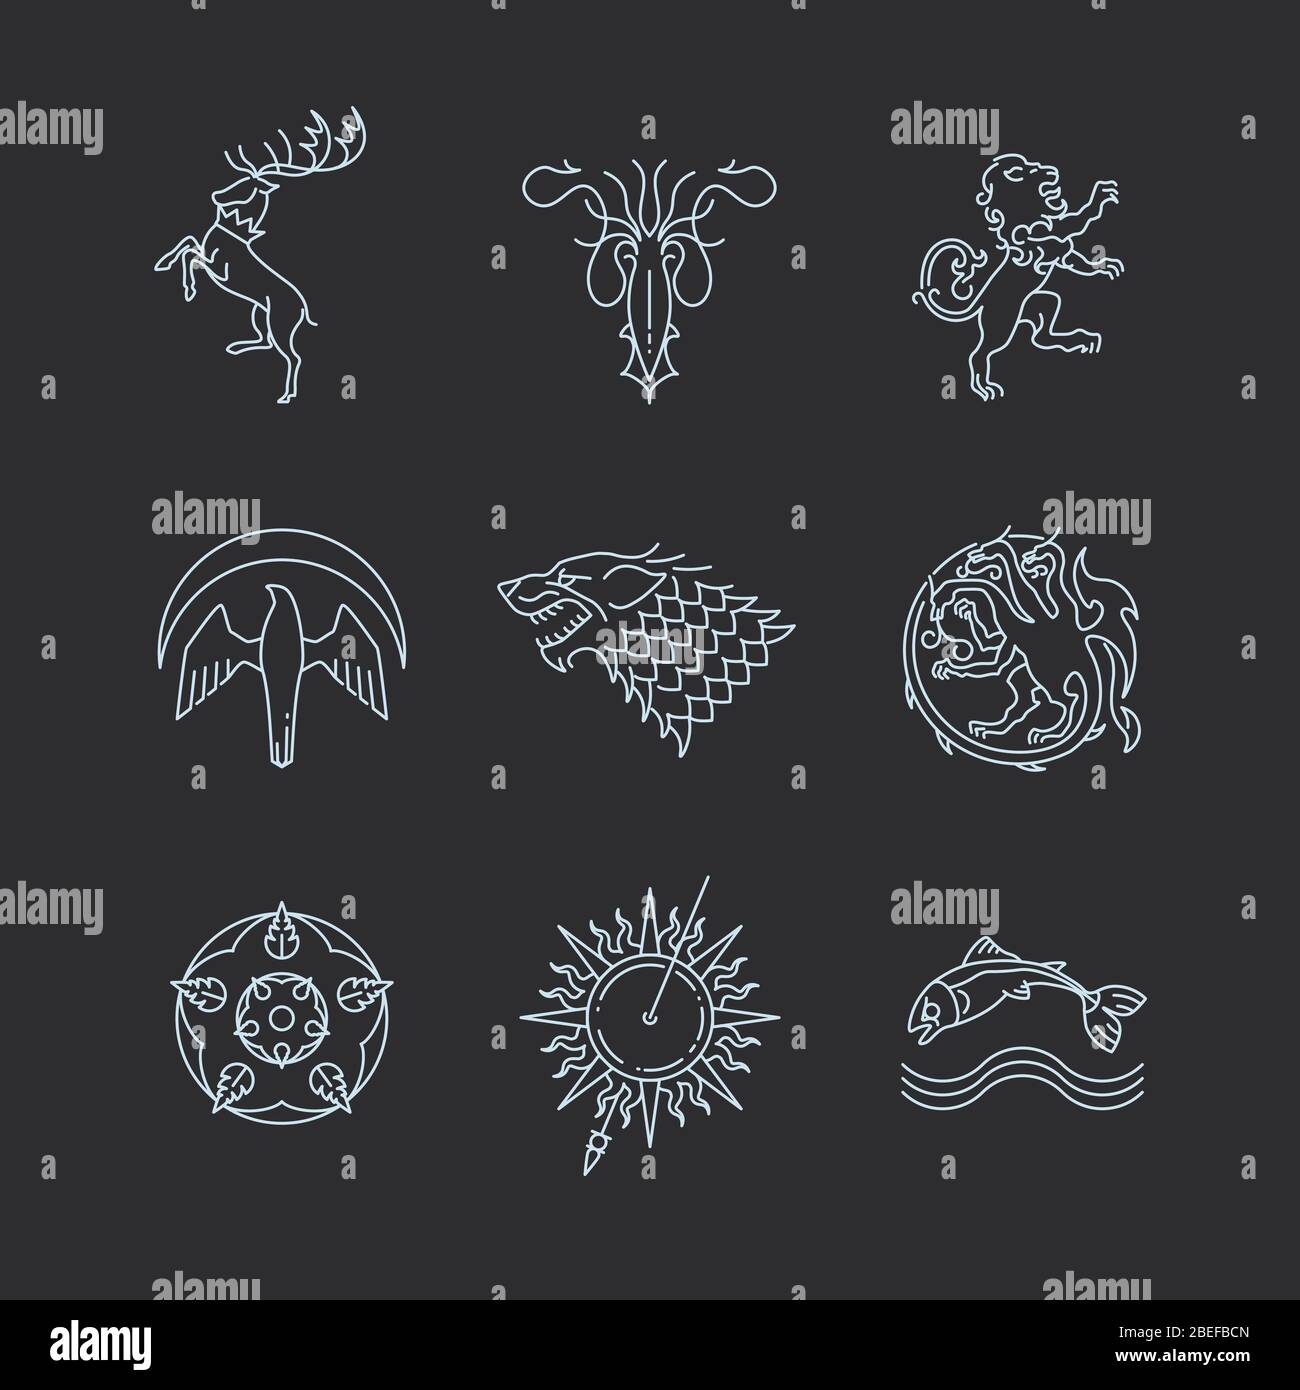 Game Of Thrones Logo PNG Vector (EPS) Free Download